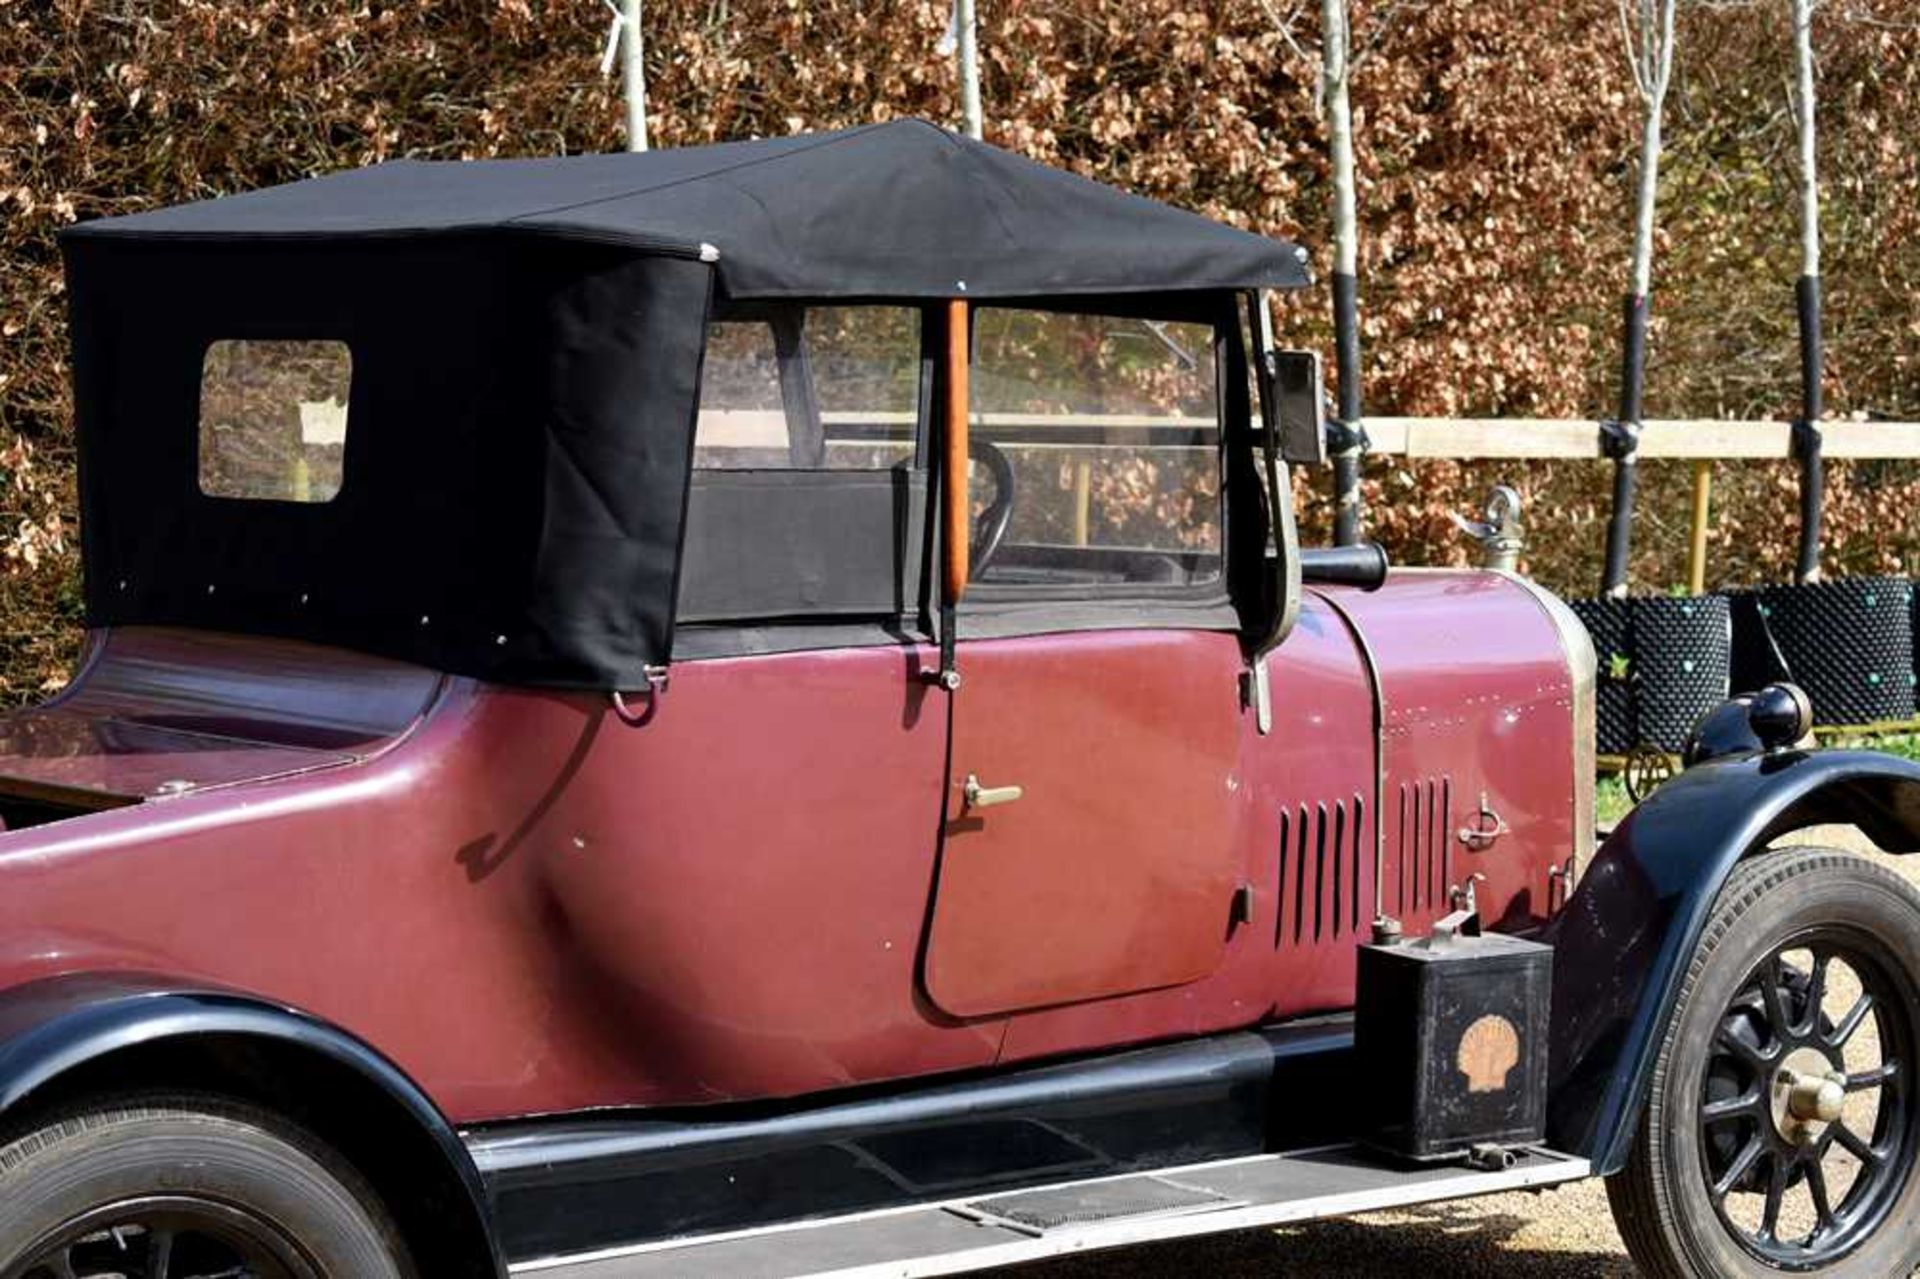 1926 Morris Oxford 'Bullnose' 2-Seat Tourer with Dickey - Image 60 of 99